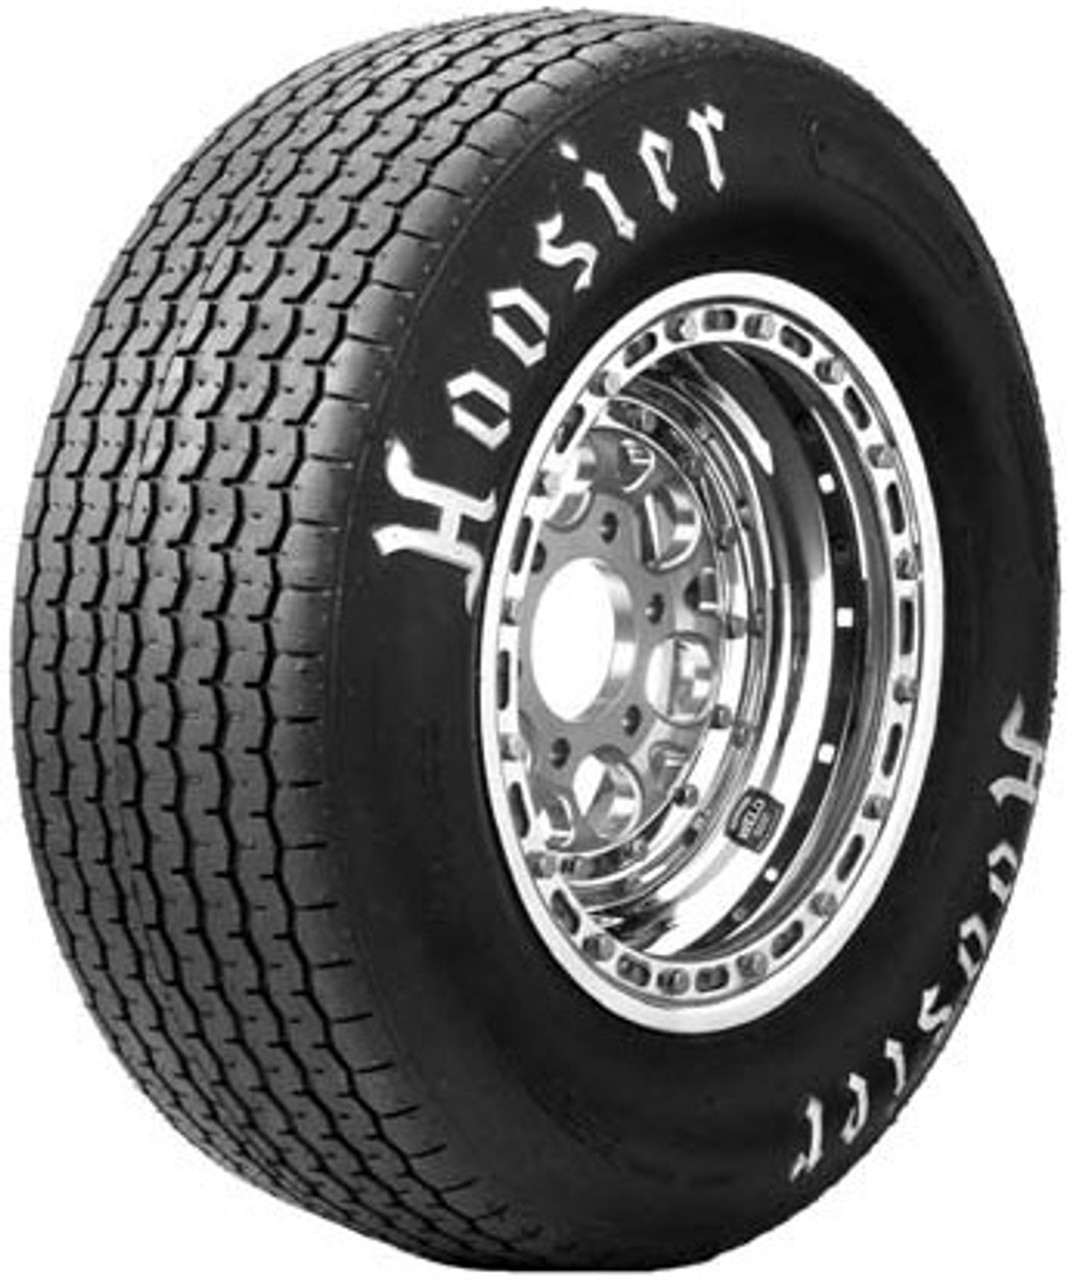 Hoosier Quick Time D.O.T. Drag Racing Tire